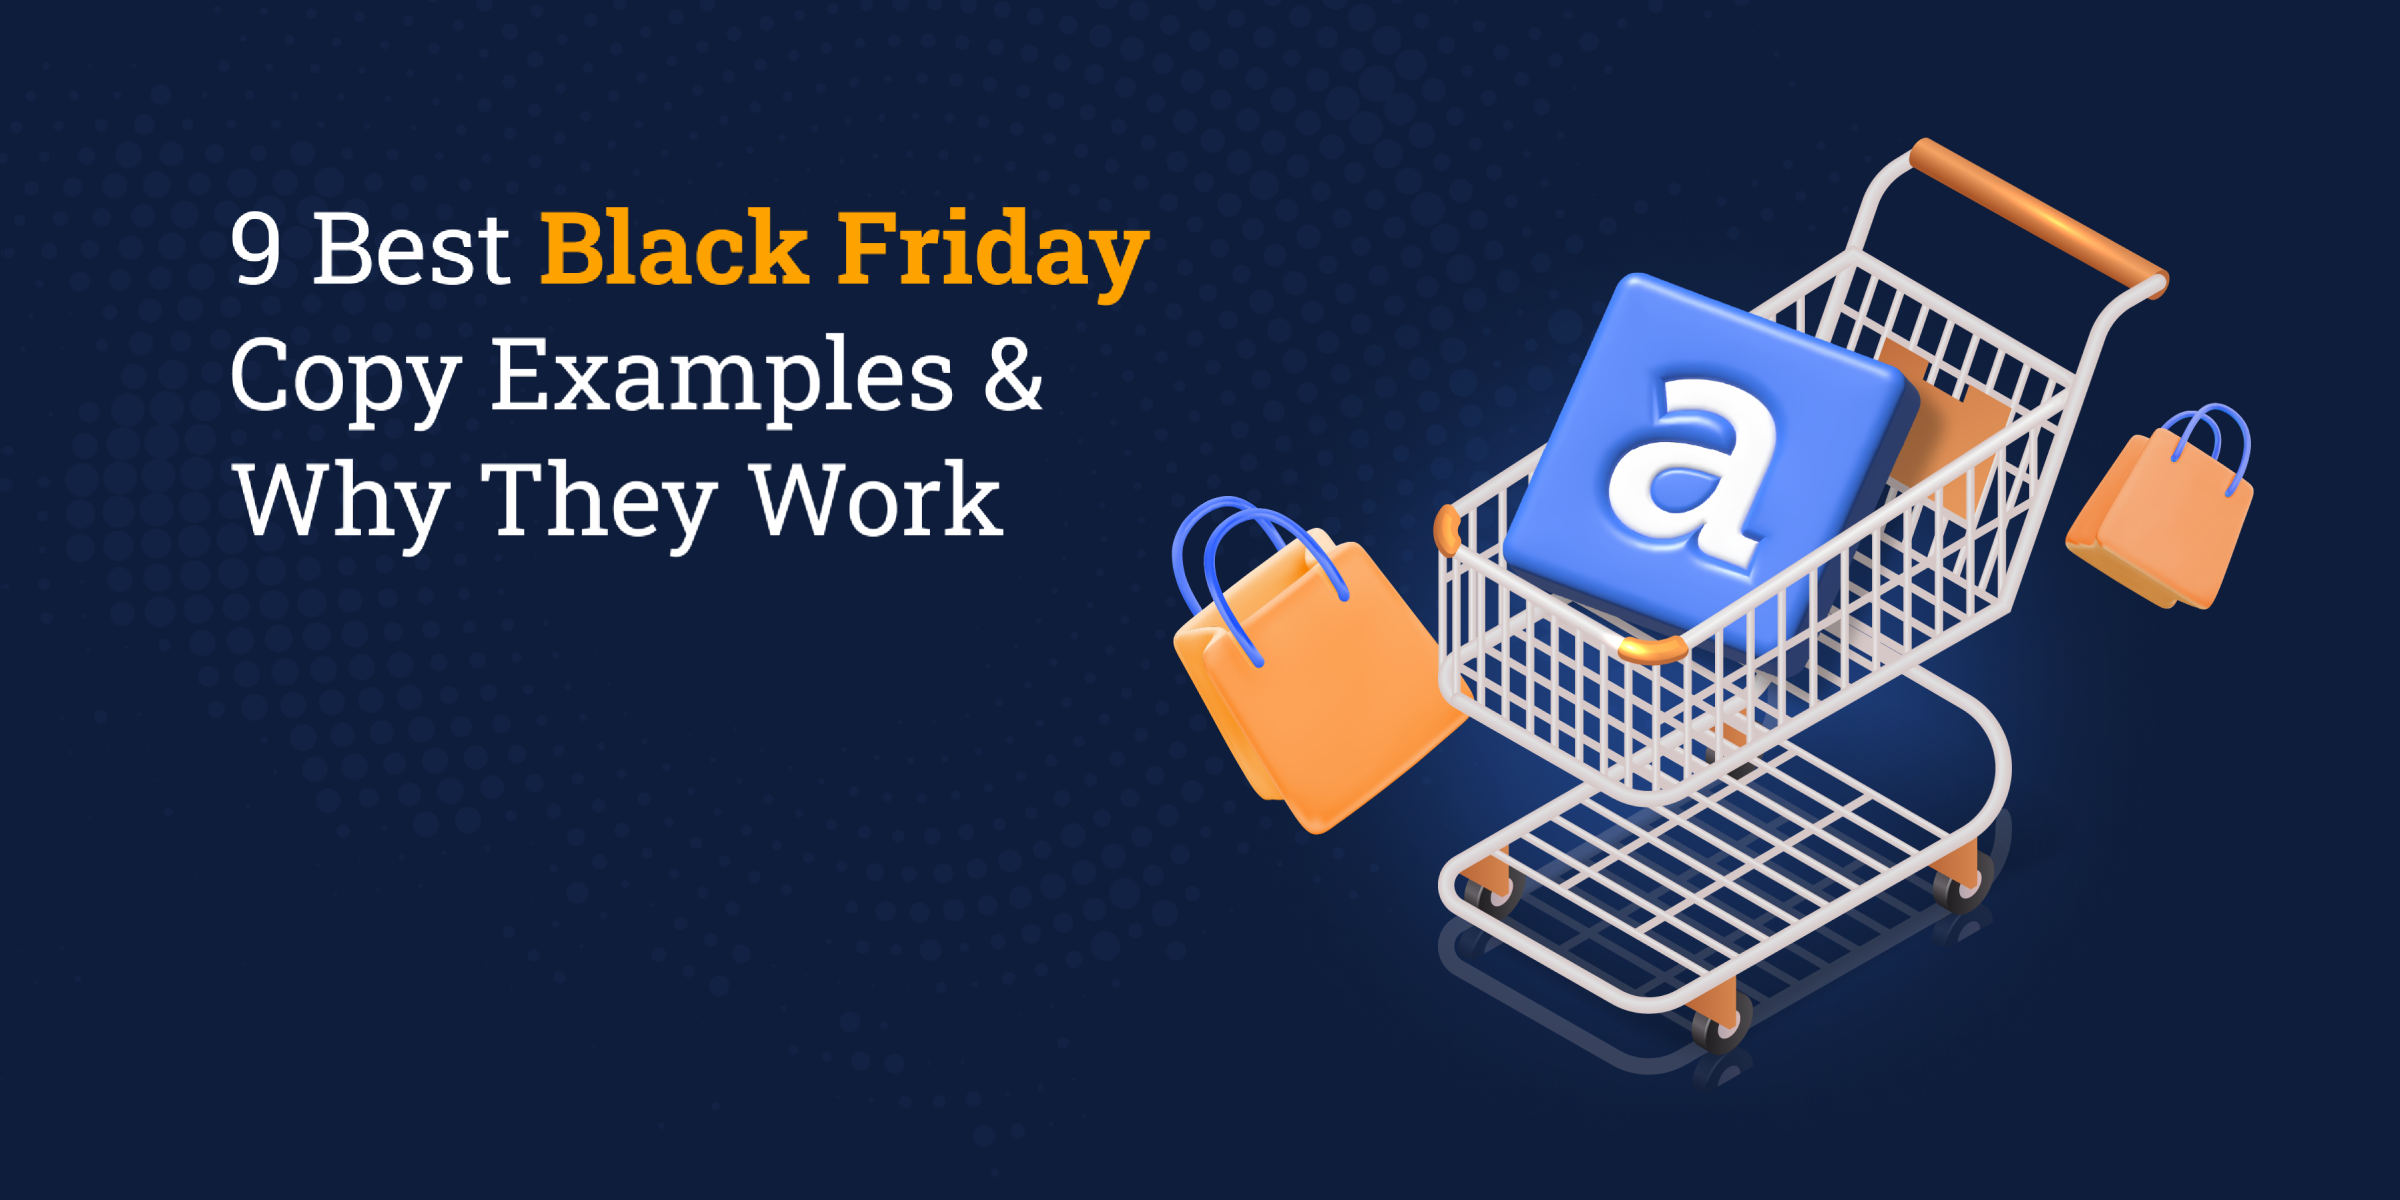 9 Best Black Friday Copy Examples & Why They Work